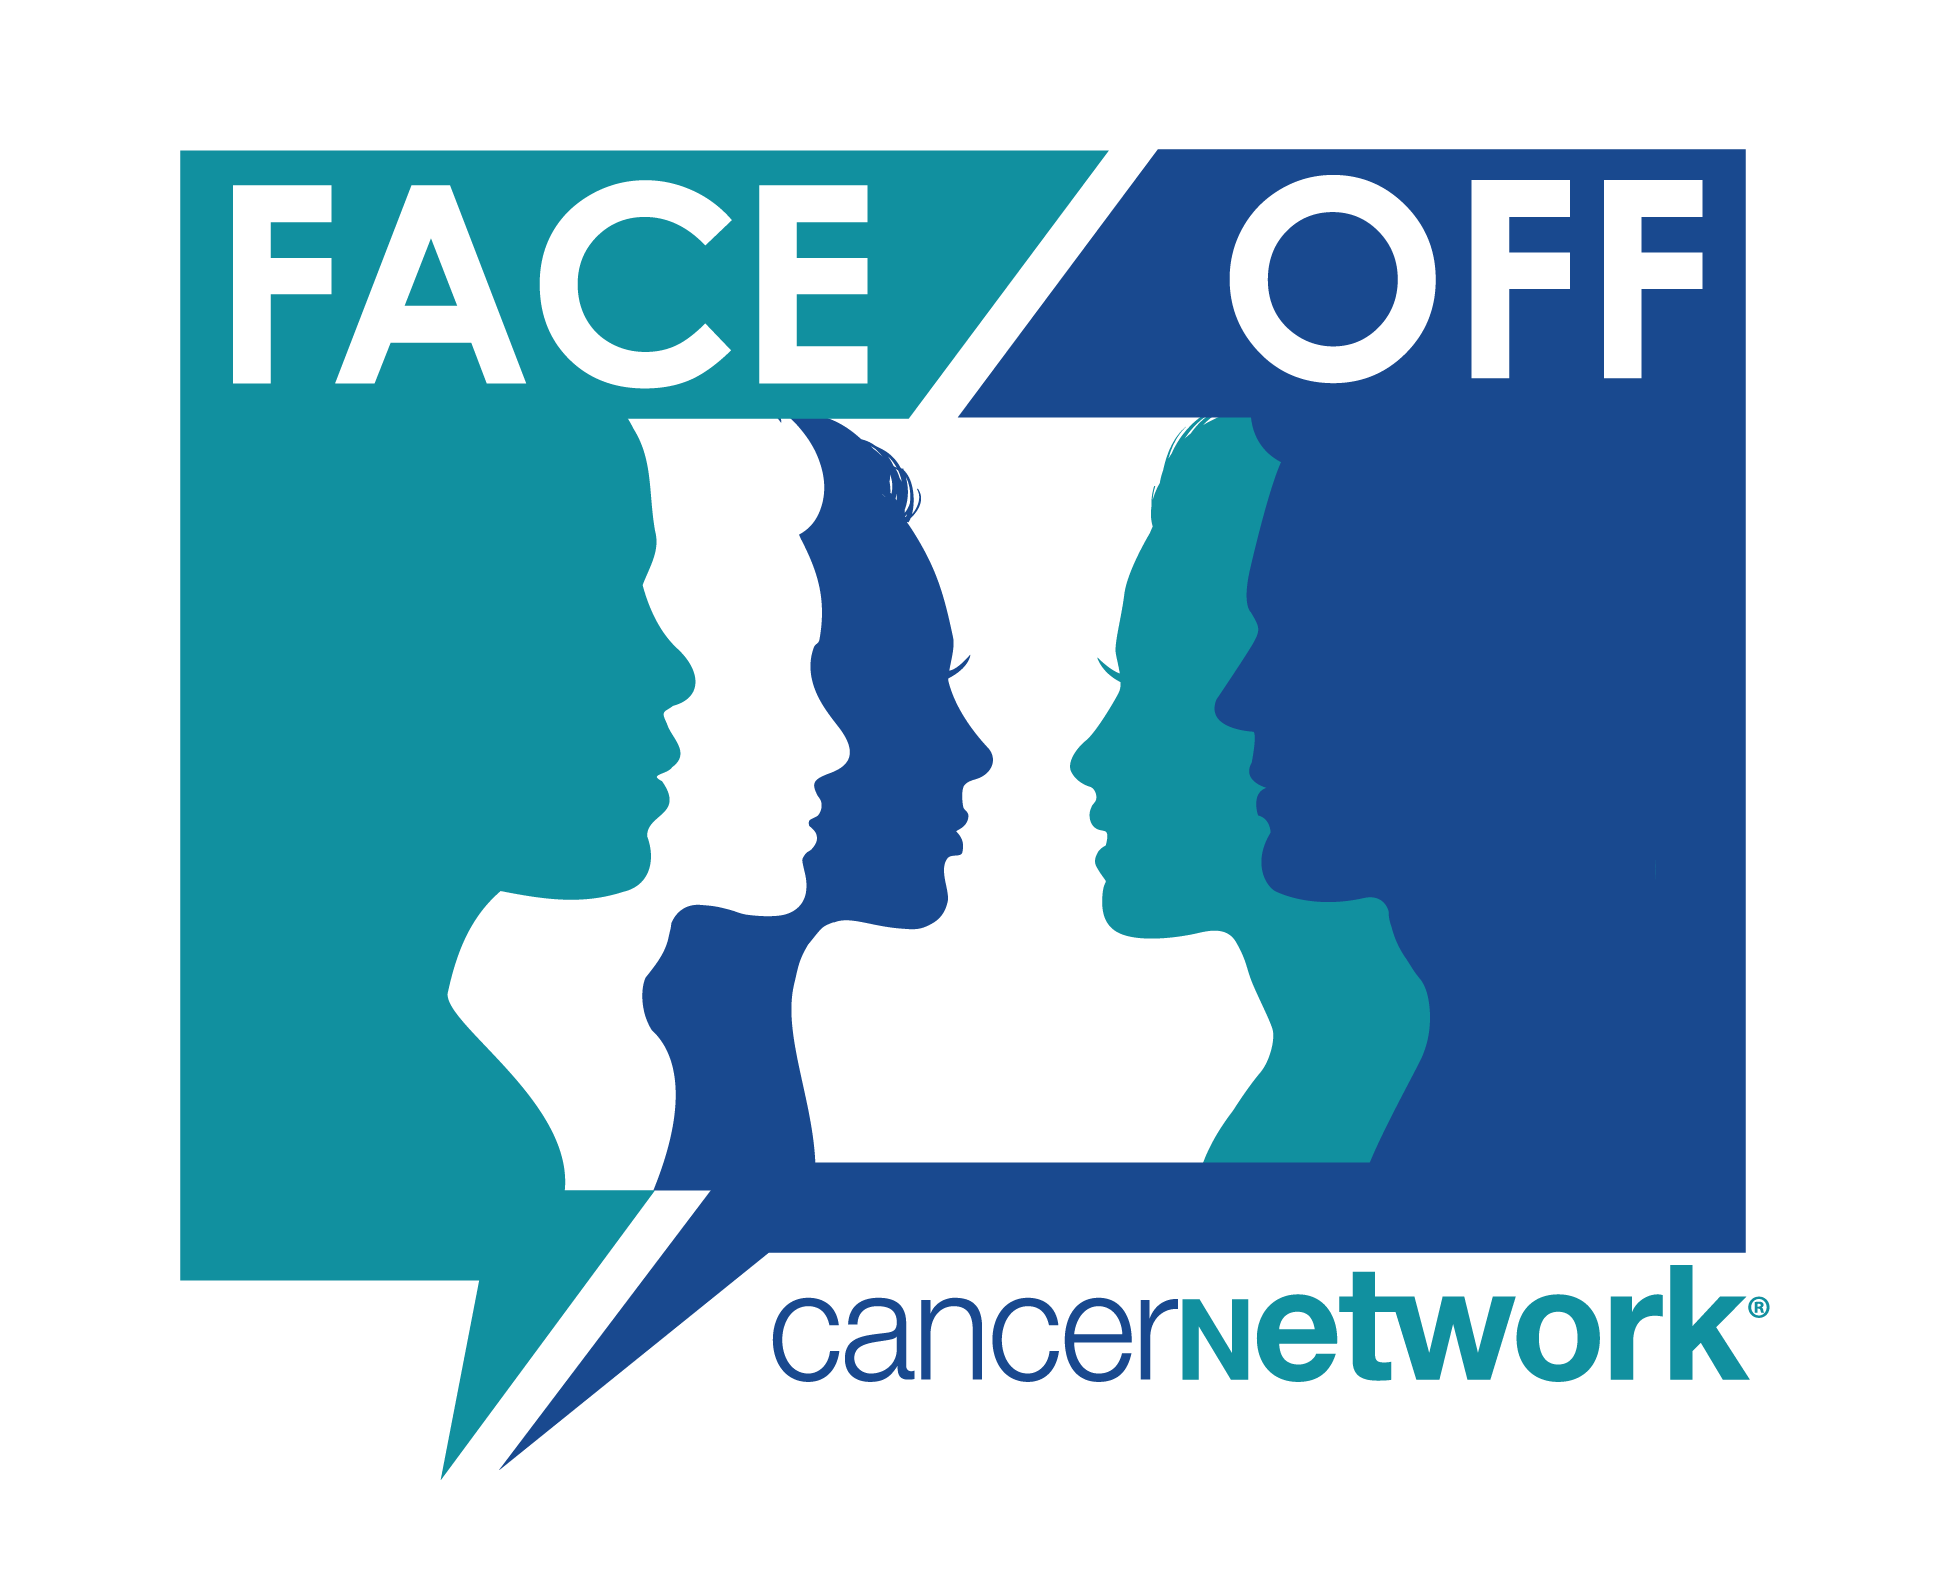 Mayo Clinic and UT Southwestern “Face Off” Over Multiple Myeloma and CML 